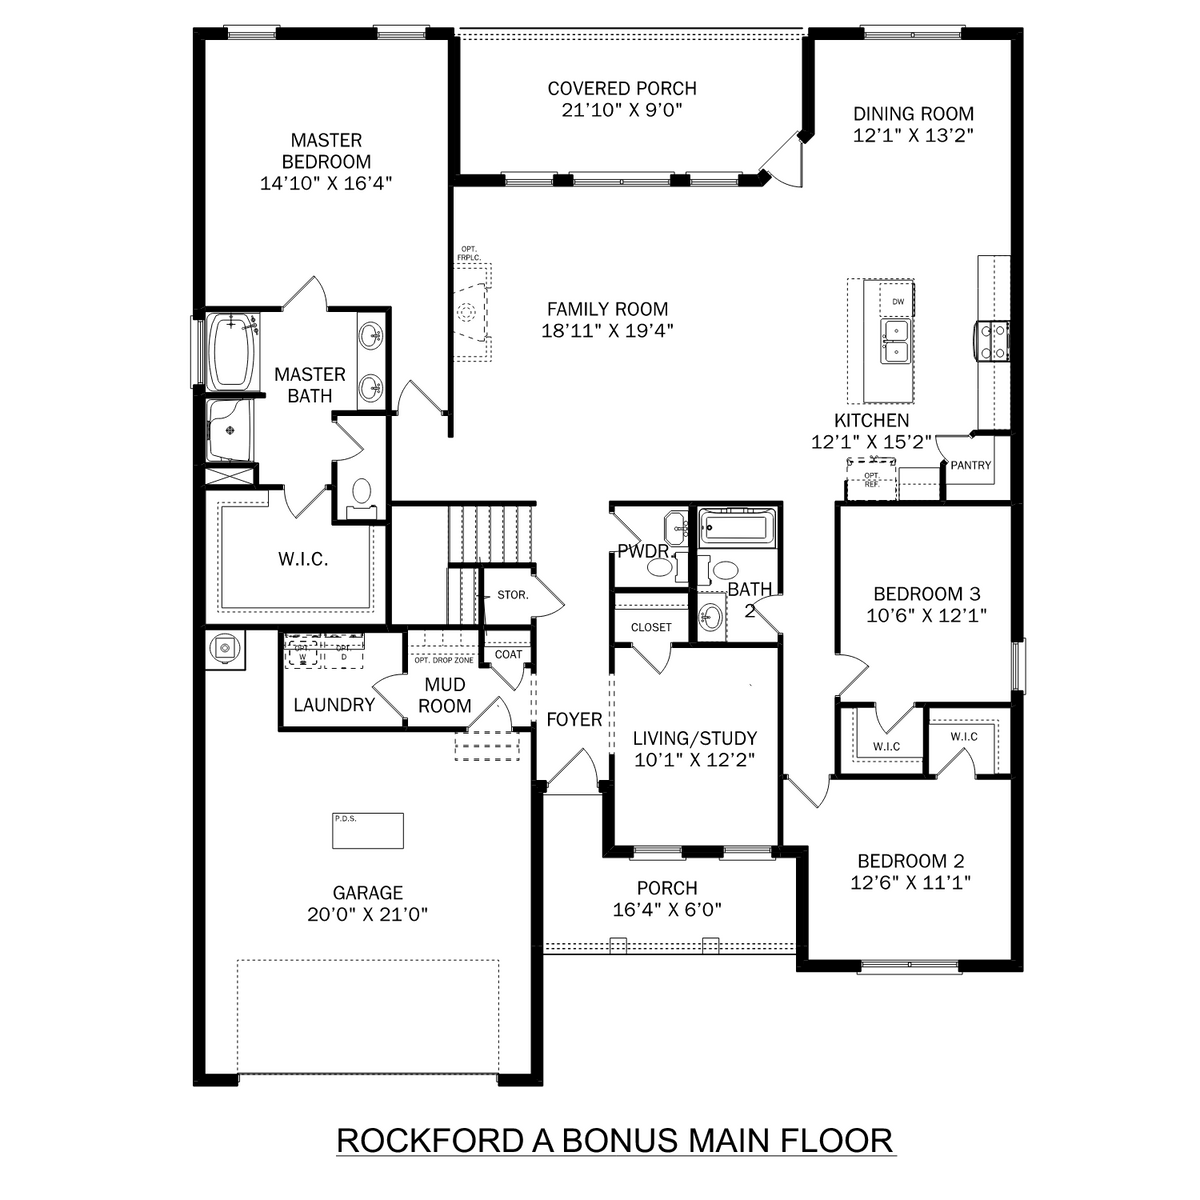 1 - The Rockford with Bonus buildable floor plan layout in Davidson Homes' Kendall Downs community.